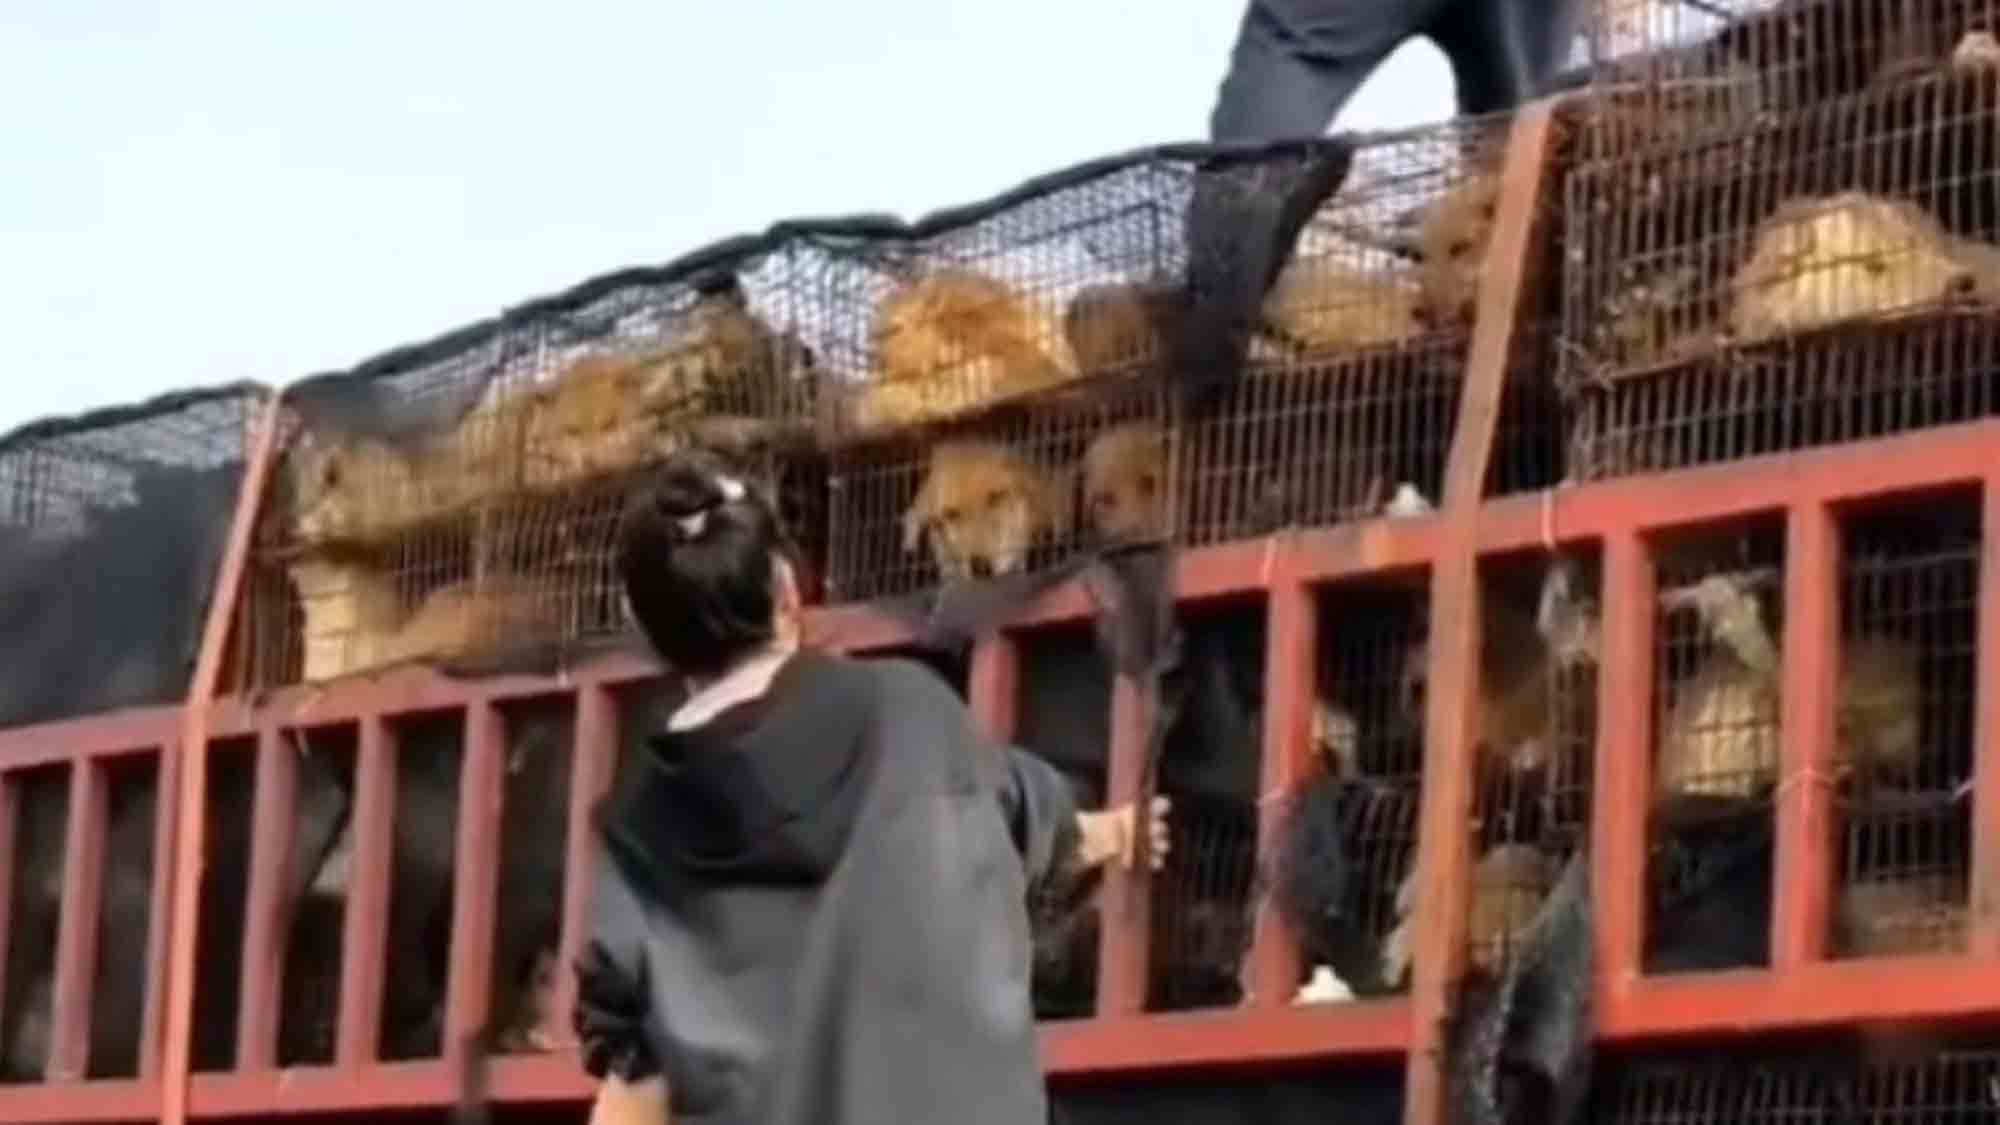 Thousands Of Dogs Stuffed Into Cages Rescued From Butcher’s By Outraged Motorists